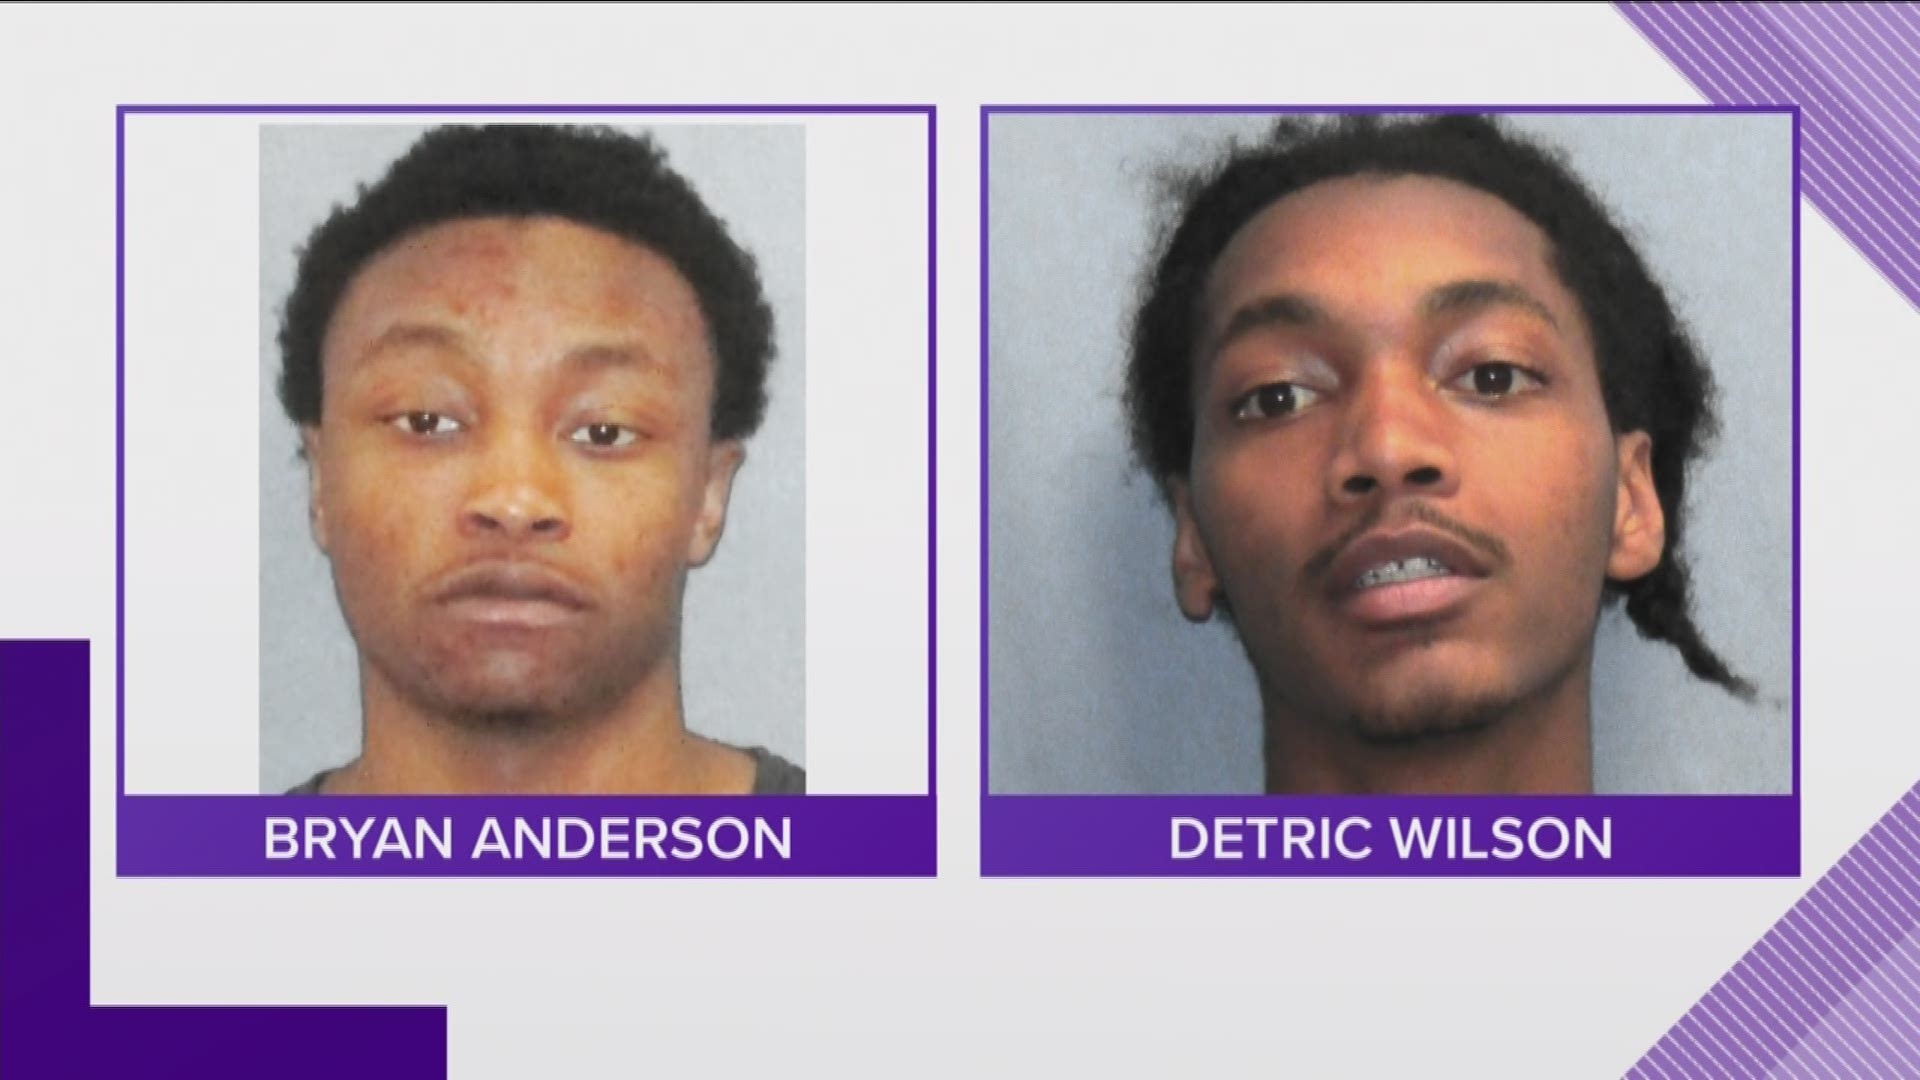 Little rock police arrest two men they say robbed a bank in Hillcrest.